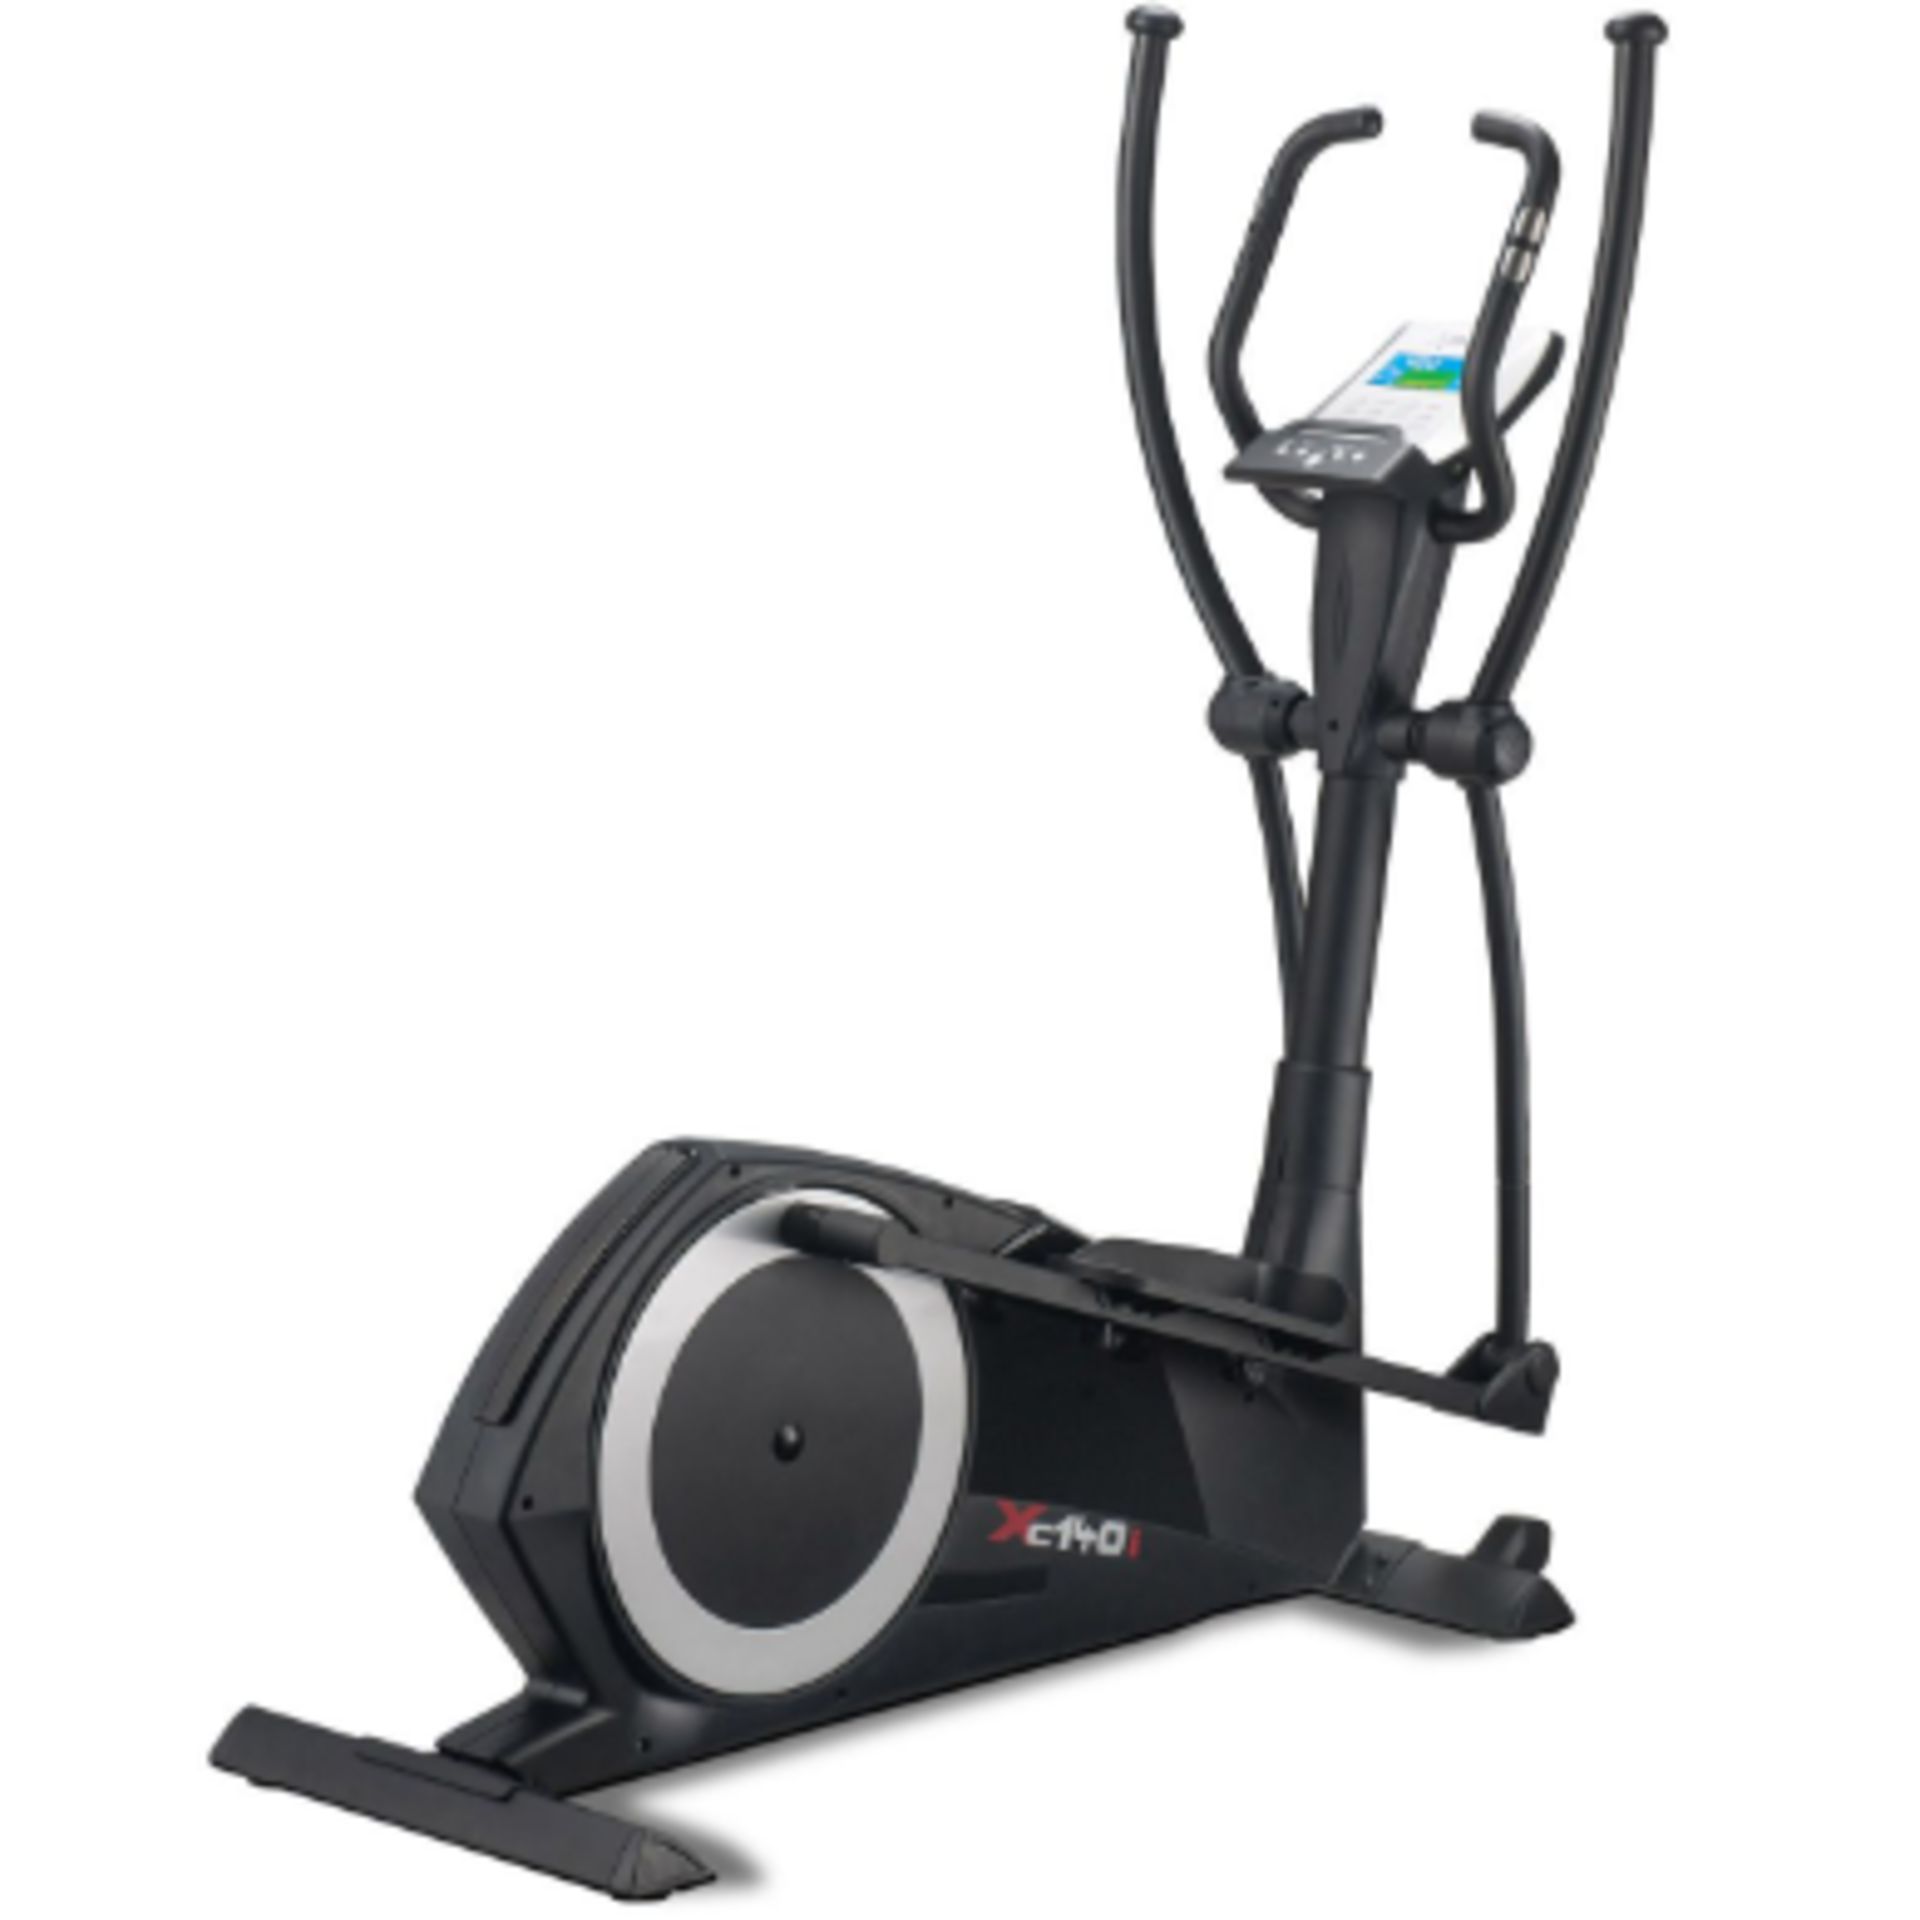 DKN - XC-140 Elliptical Cross Trainer - Unchecked, Box Damaged - Viewing Recommended. RRP œ799